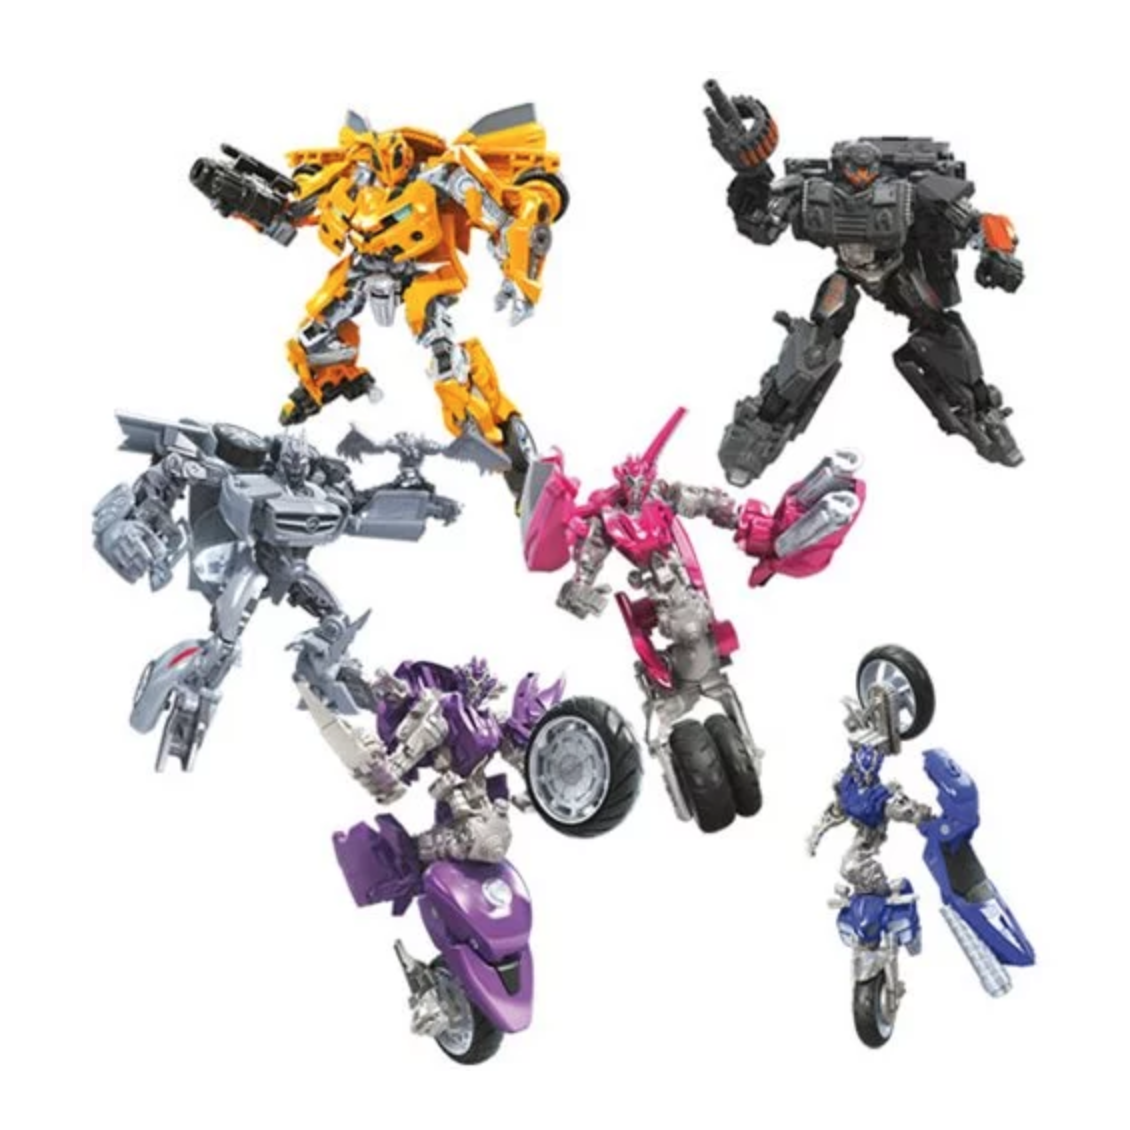 Image of Transformers Studio Series Premier Deluxe Wave 8 - JANUARY 2020